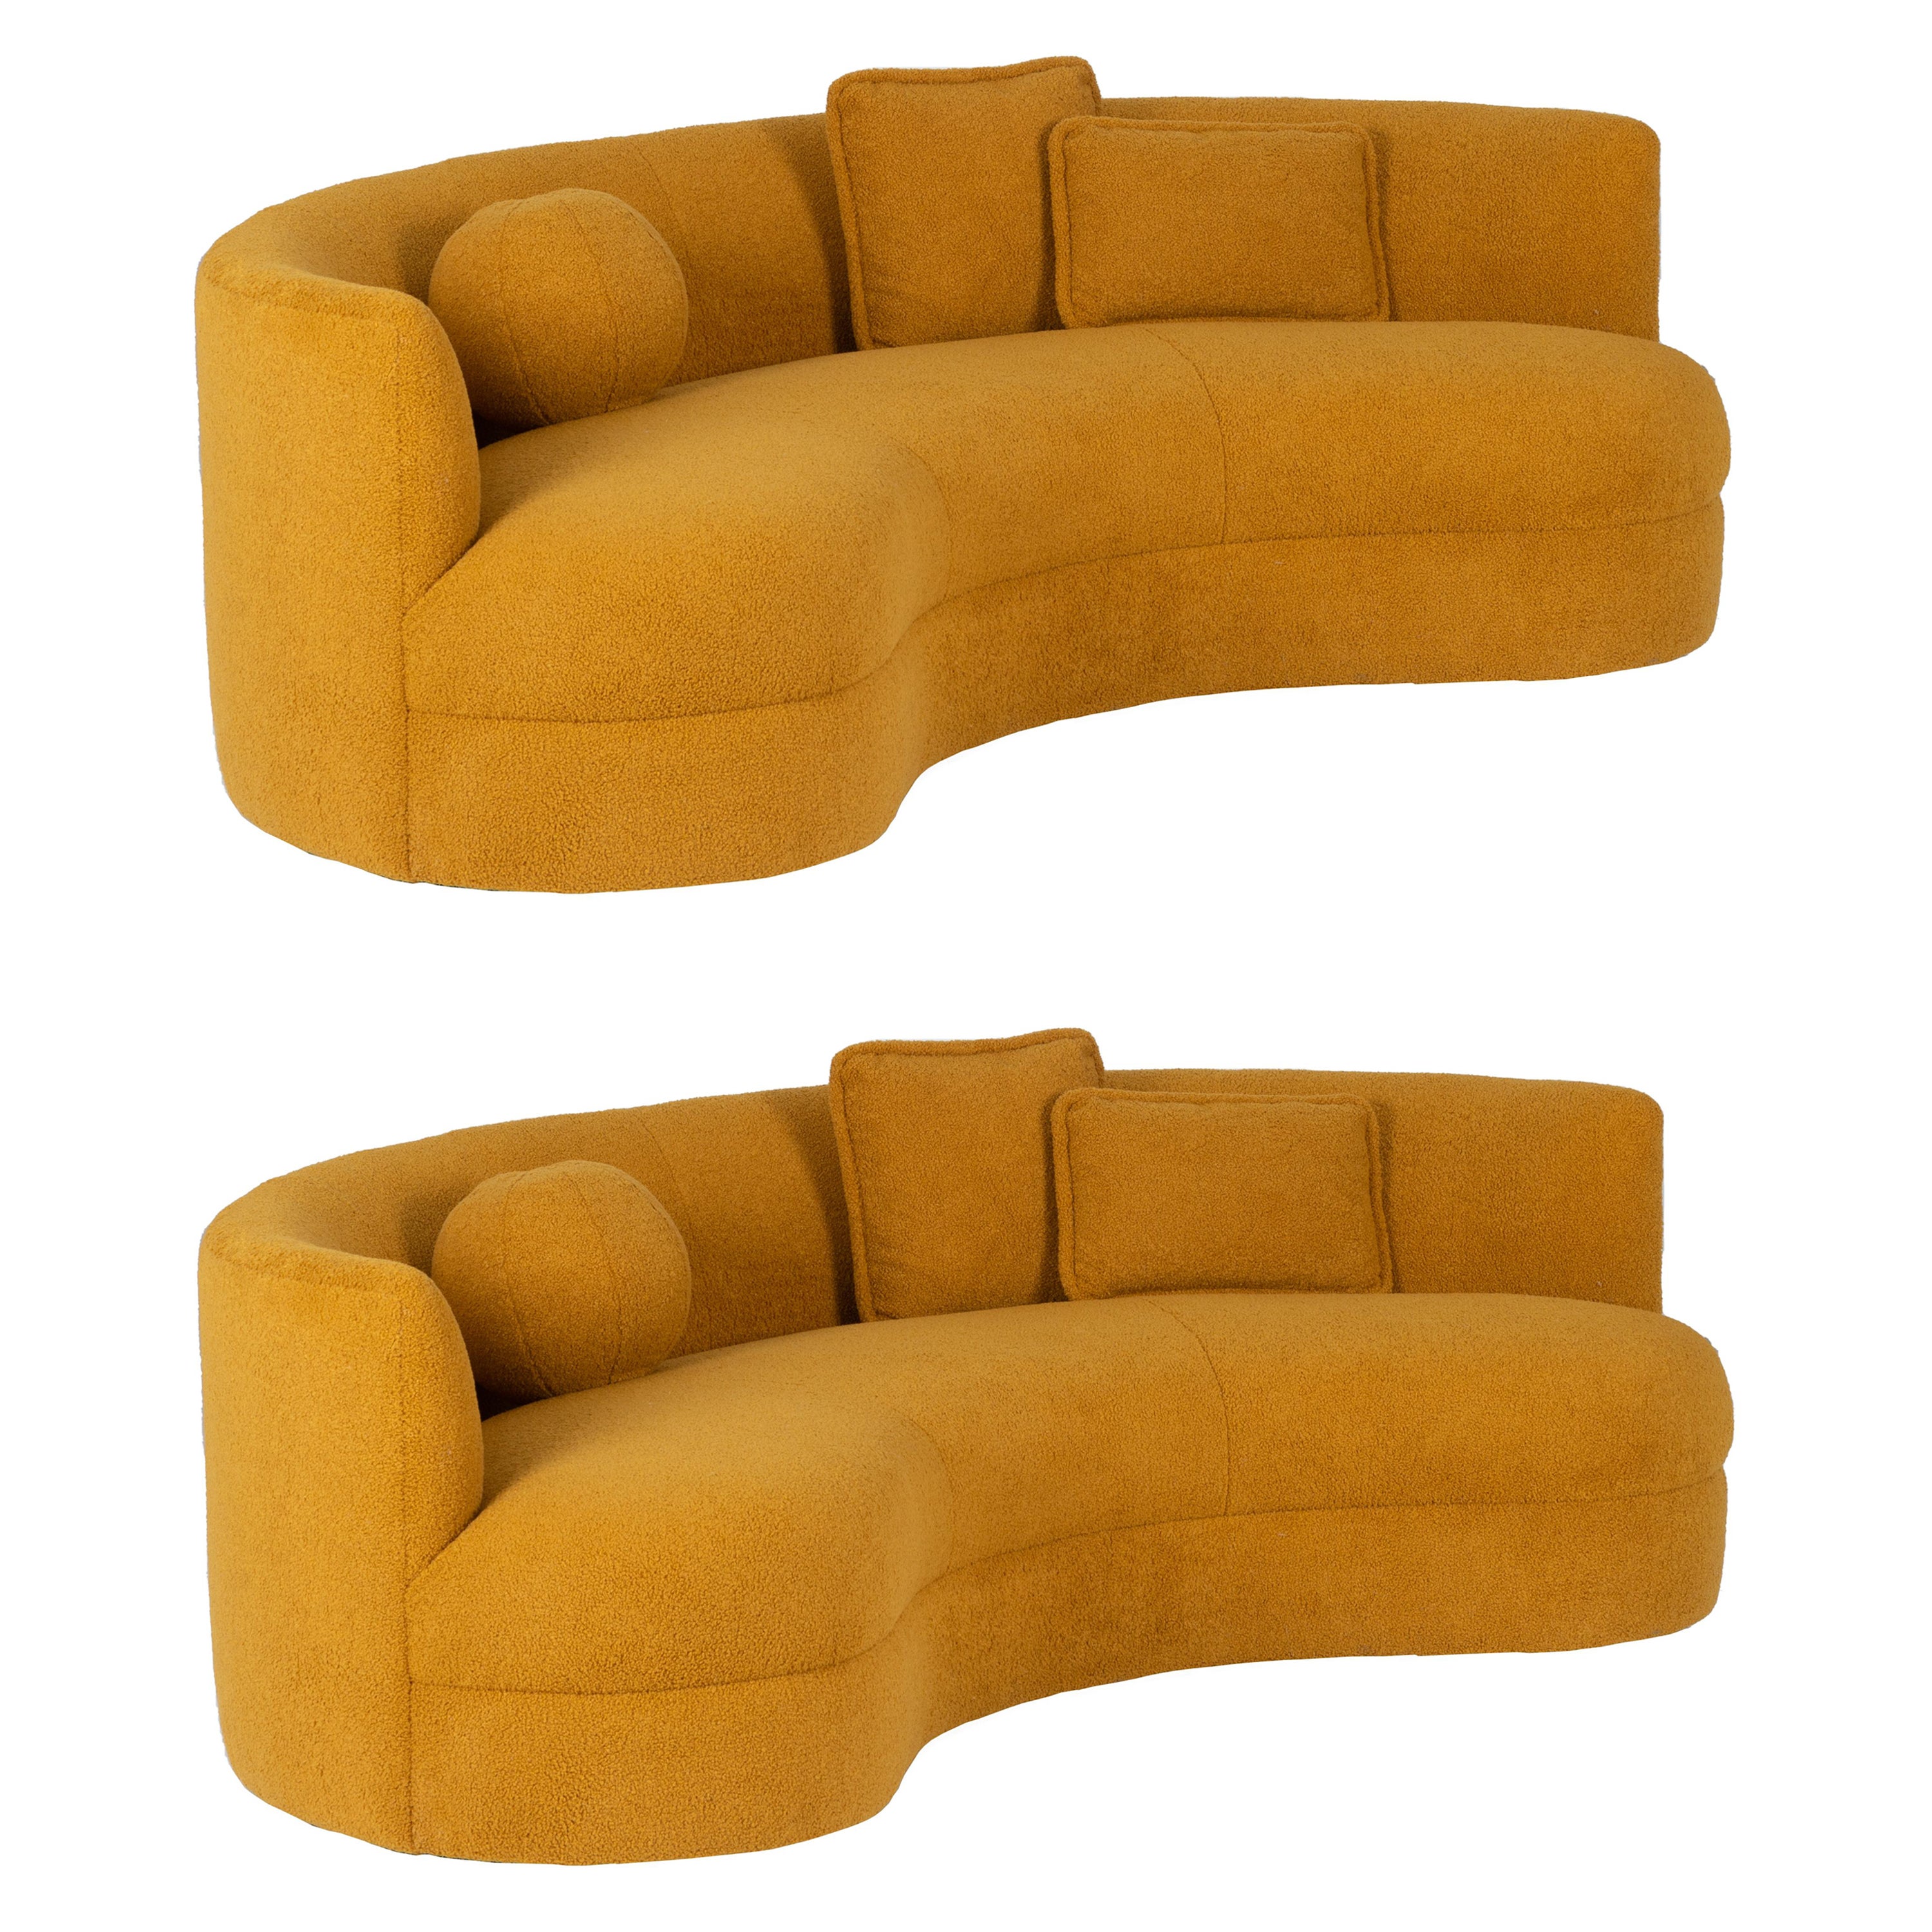 Pair of John Mascheroni Curved Sofas For Sale